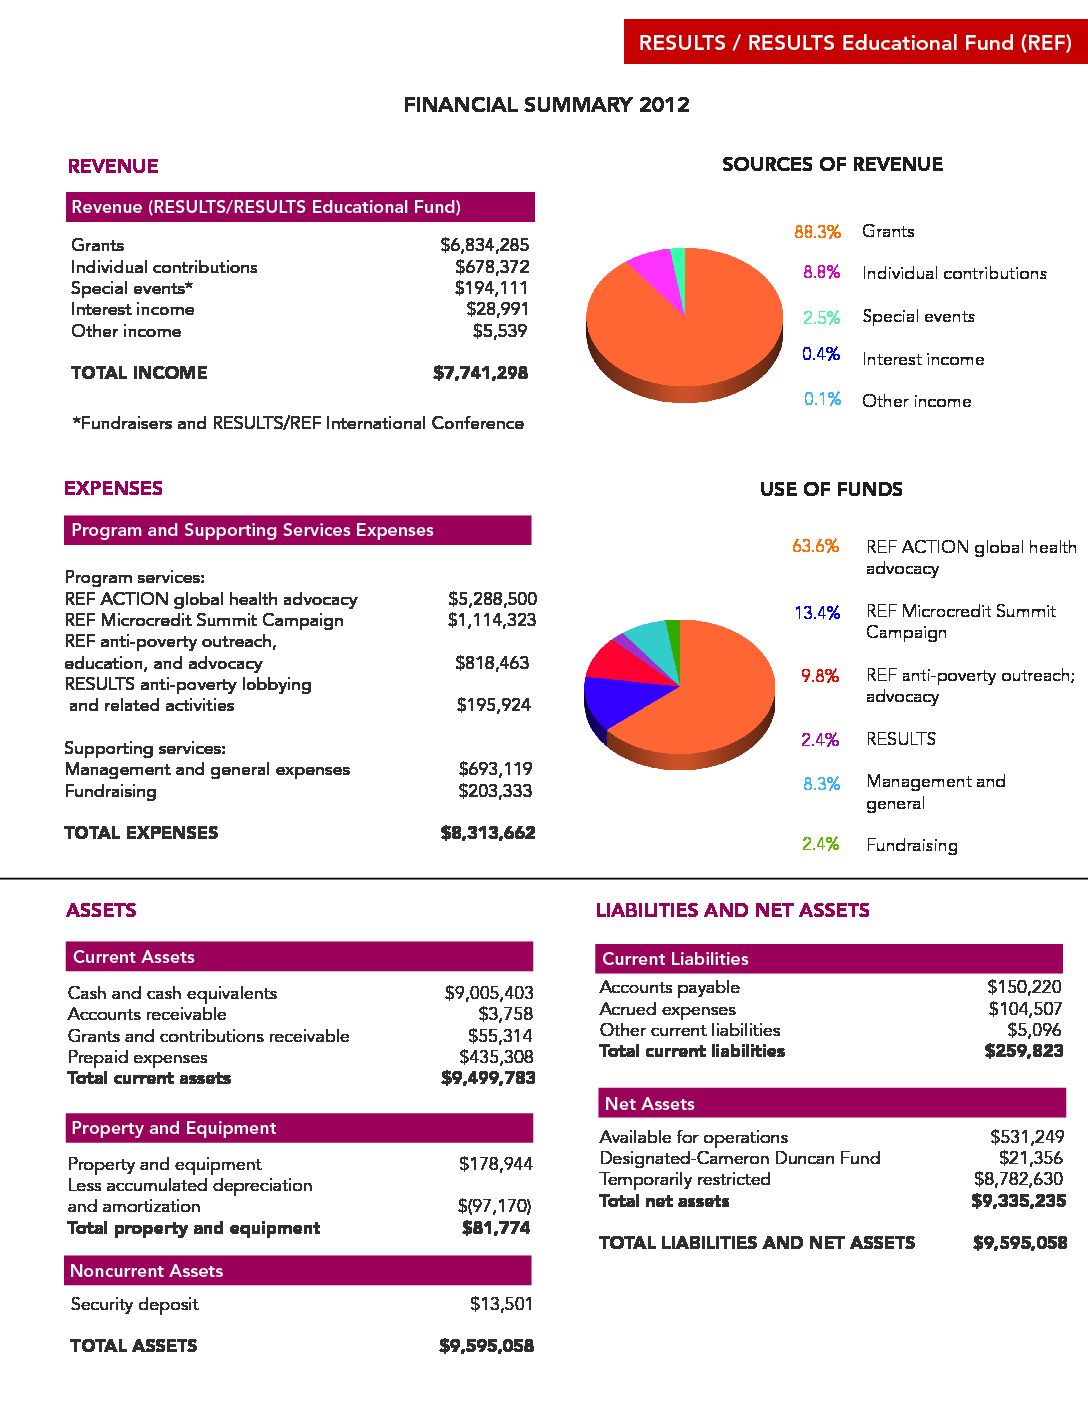 Finance Report / Annual Financial Report Template For Excel Online